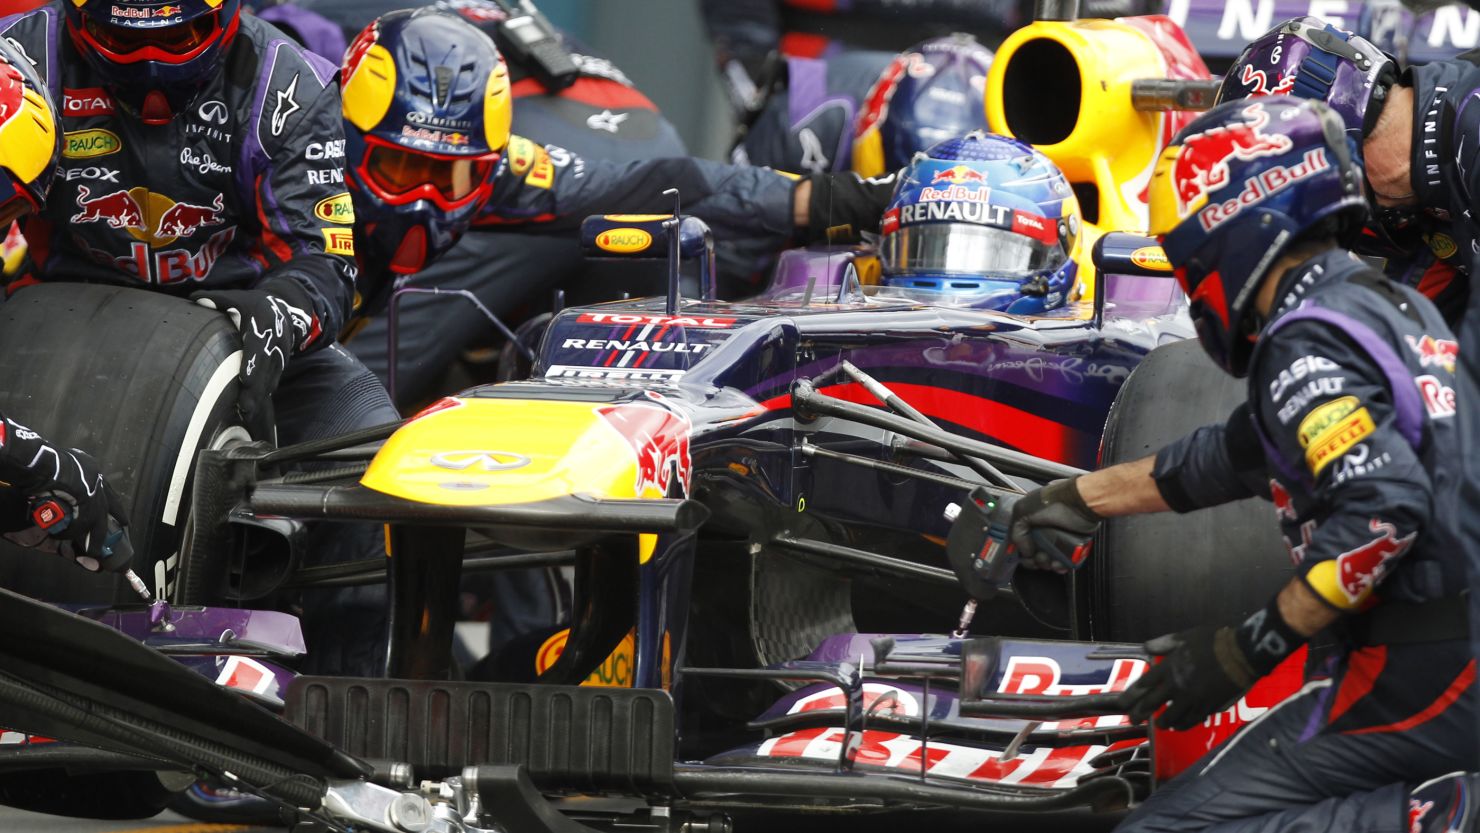 The Red Bull pit crew, pictured here working on Sebastian Vettel's car, set the record in Malaysia.